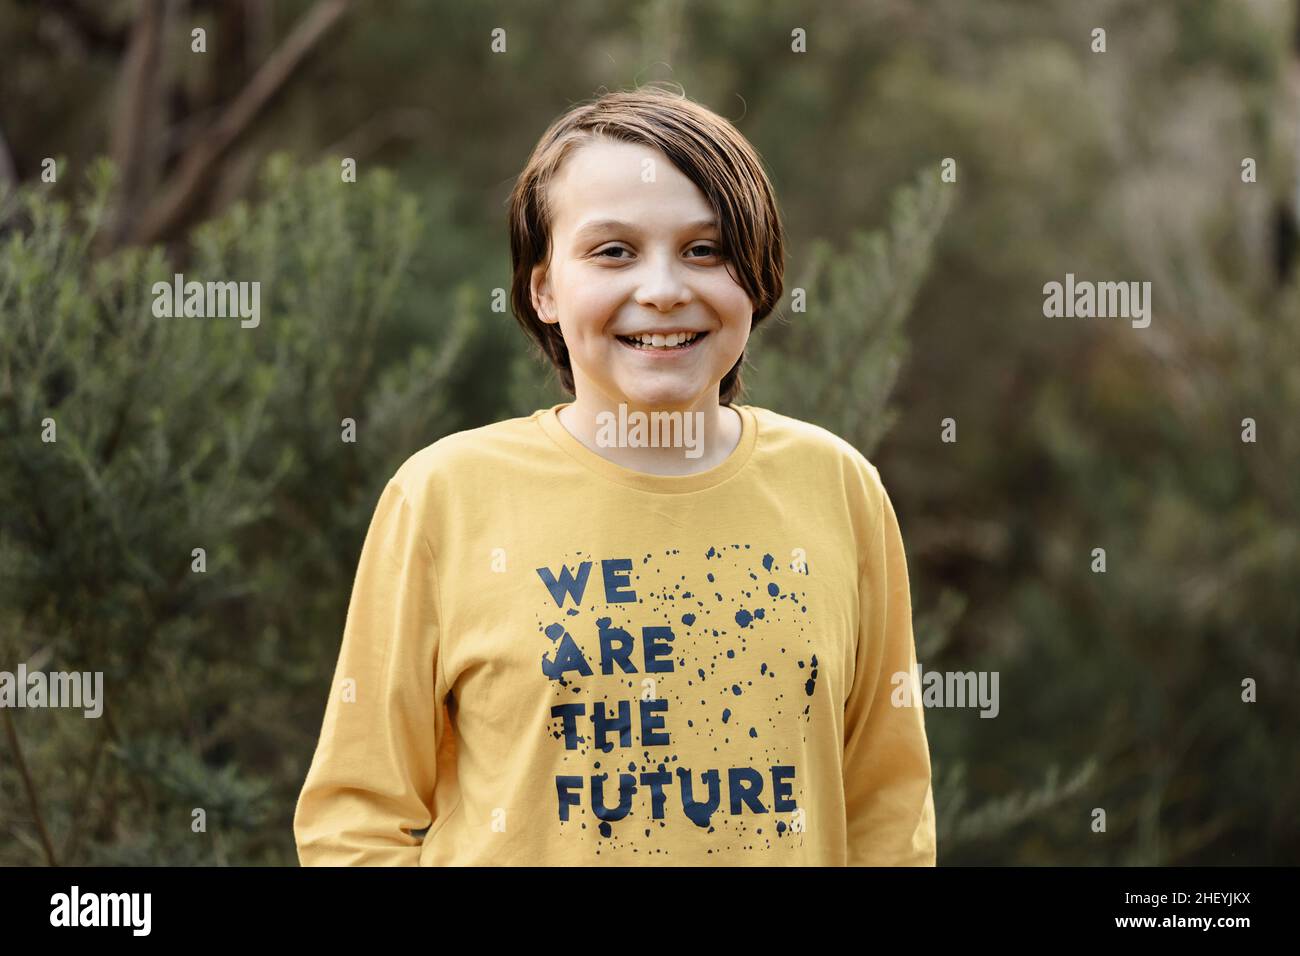 Boy wearing a generic yellow T-shirt that says we are the future Stock Photo